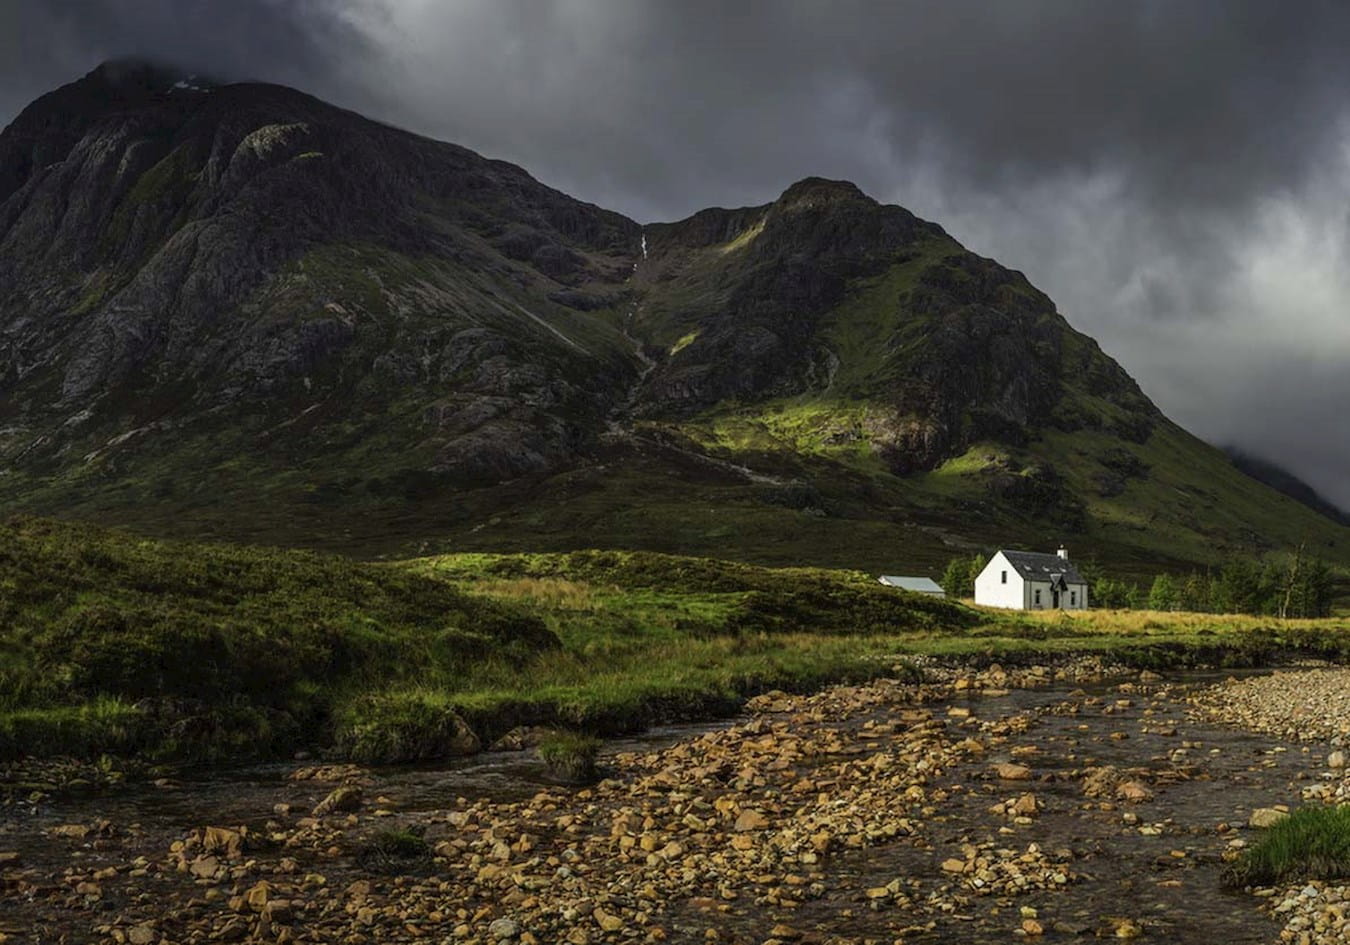 Photograph of white house in Scottish mountains